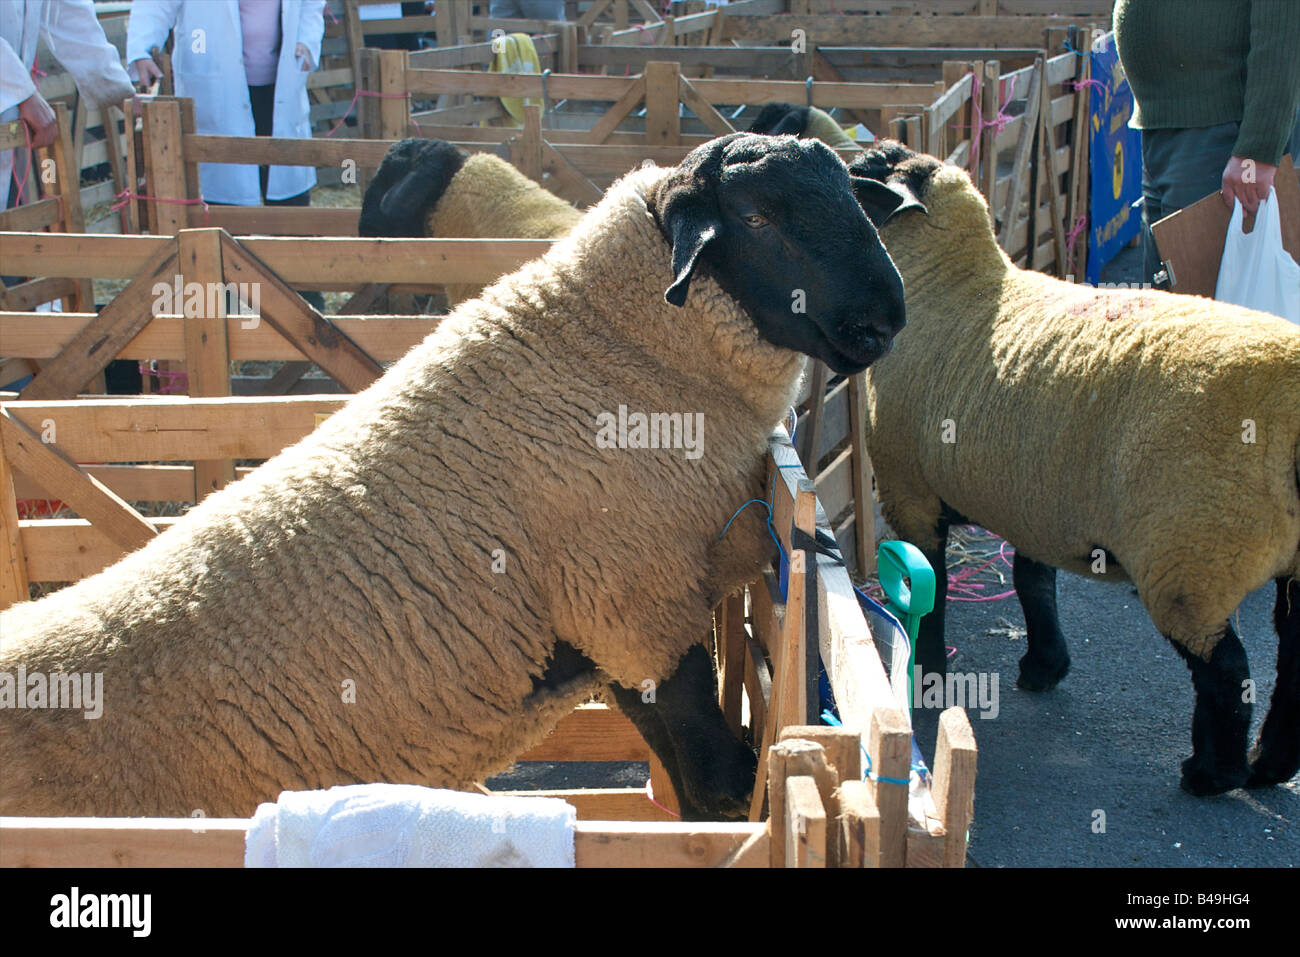 A curious Suffolk Tup (ram) wanting to see more... Stock Photo